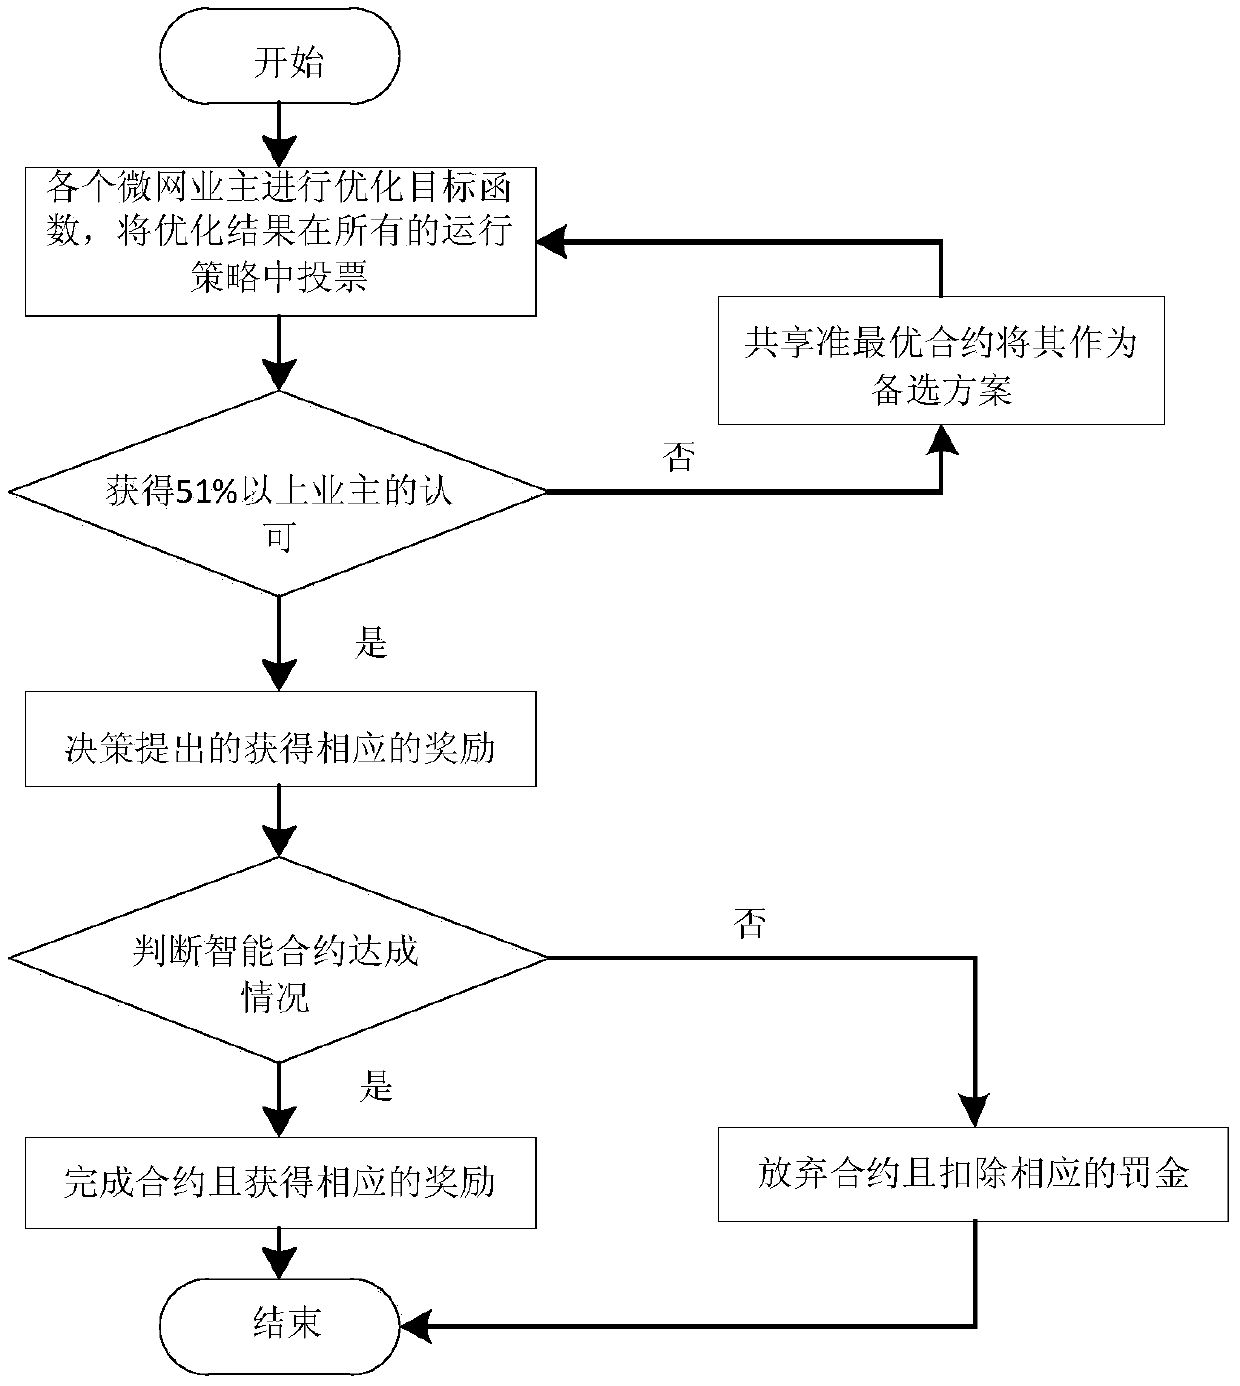 Distributed optimal scheduling method for interconnected micronetworks based on intelligent contract